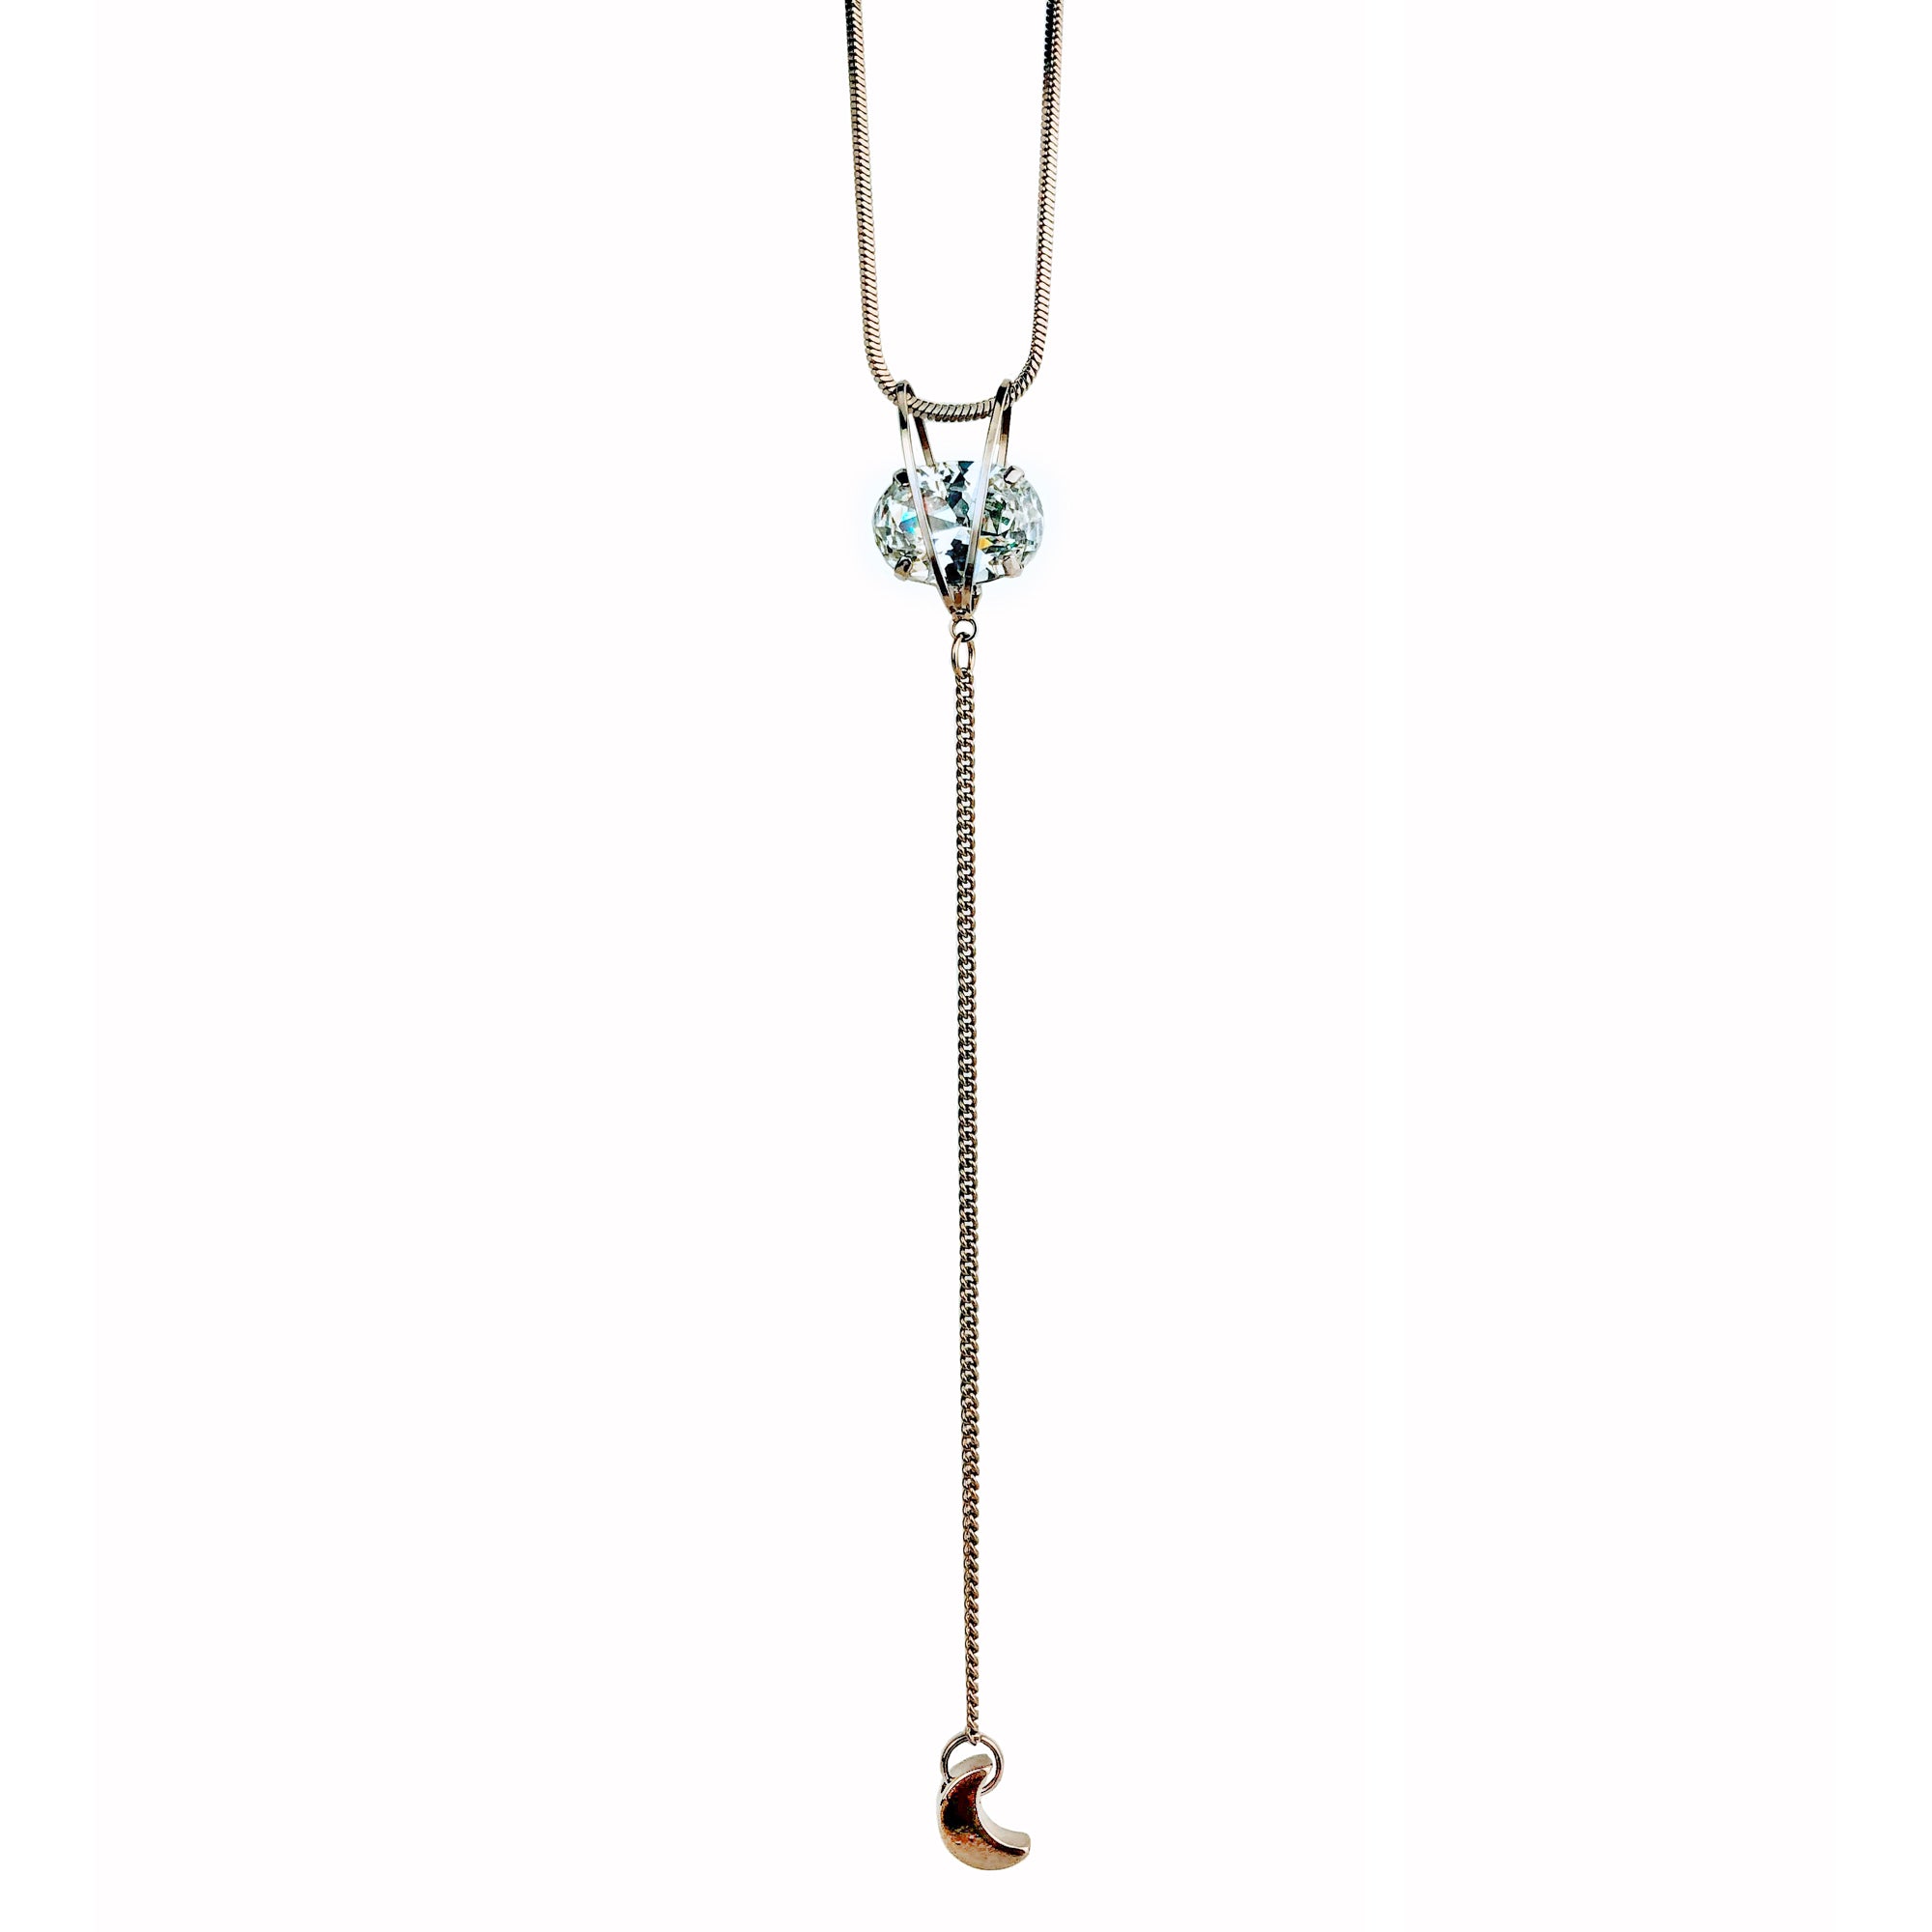 Minimalist Necklace Simmering Clear Pale Blue/White Faceted Crystal & Moon Drop New York, NY N015-01